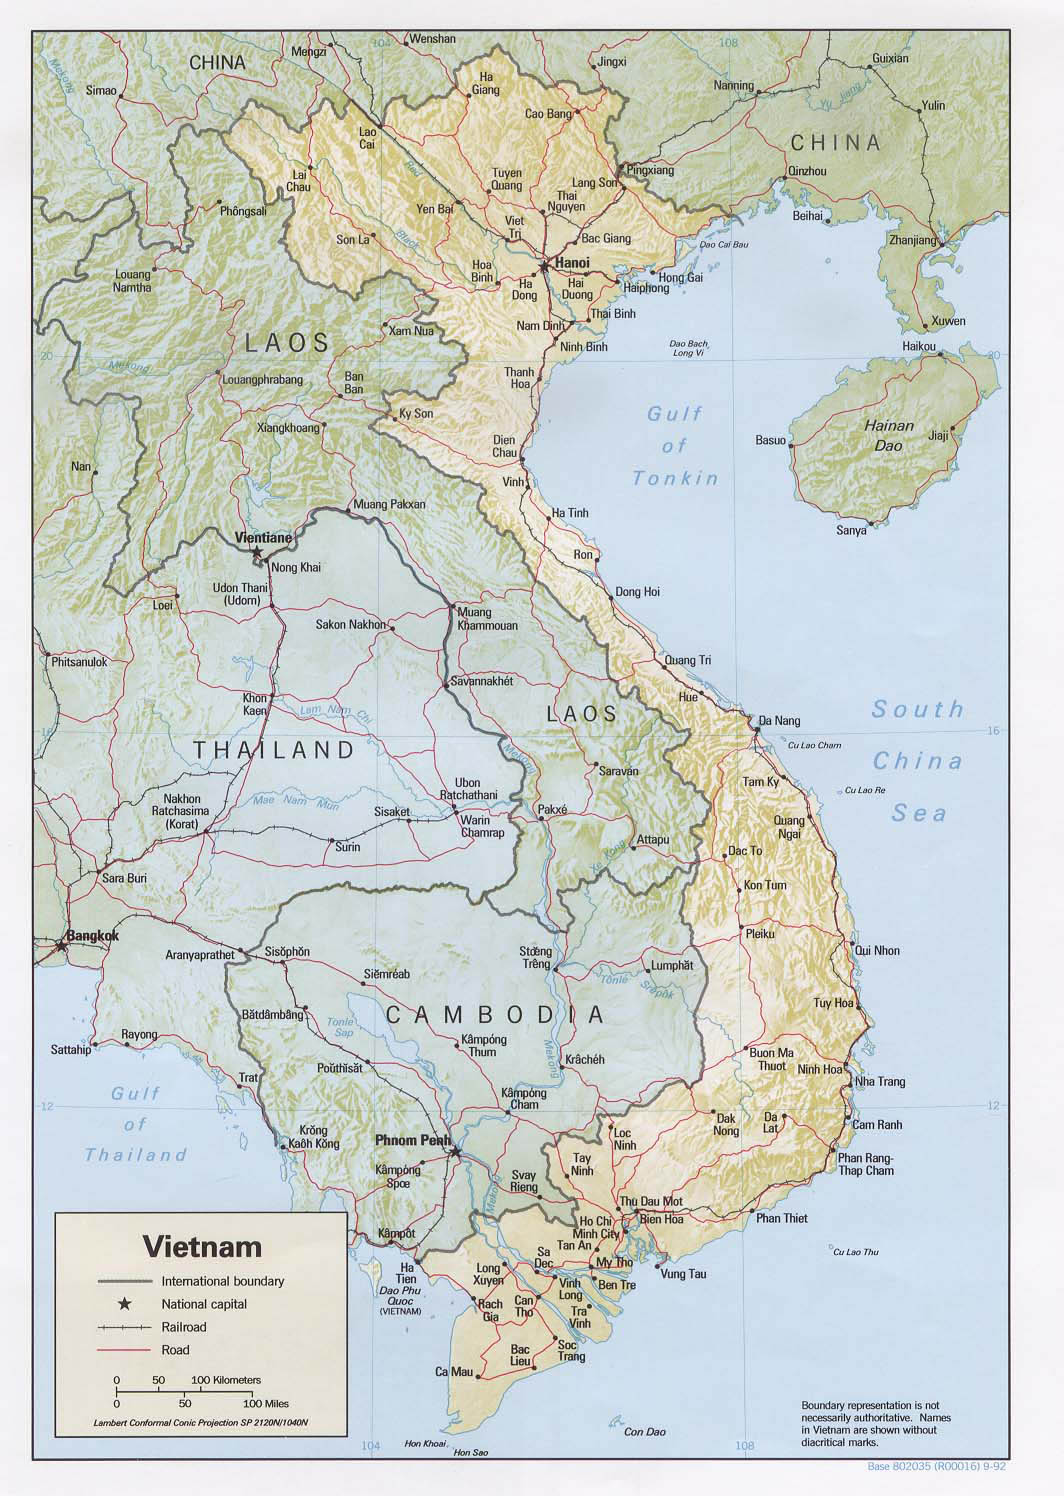 Detailed road and relief map of Vietnam. Vietnam detailed road and